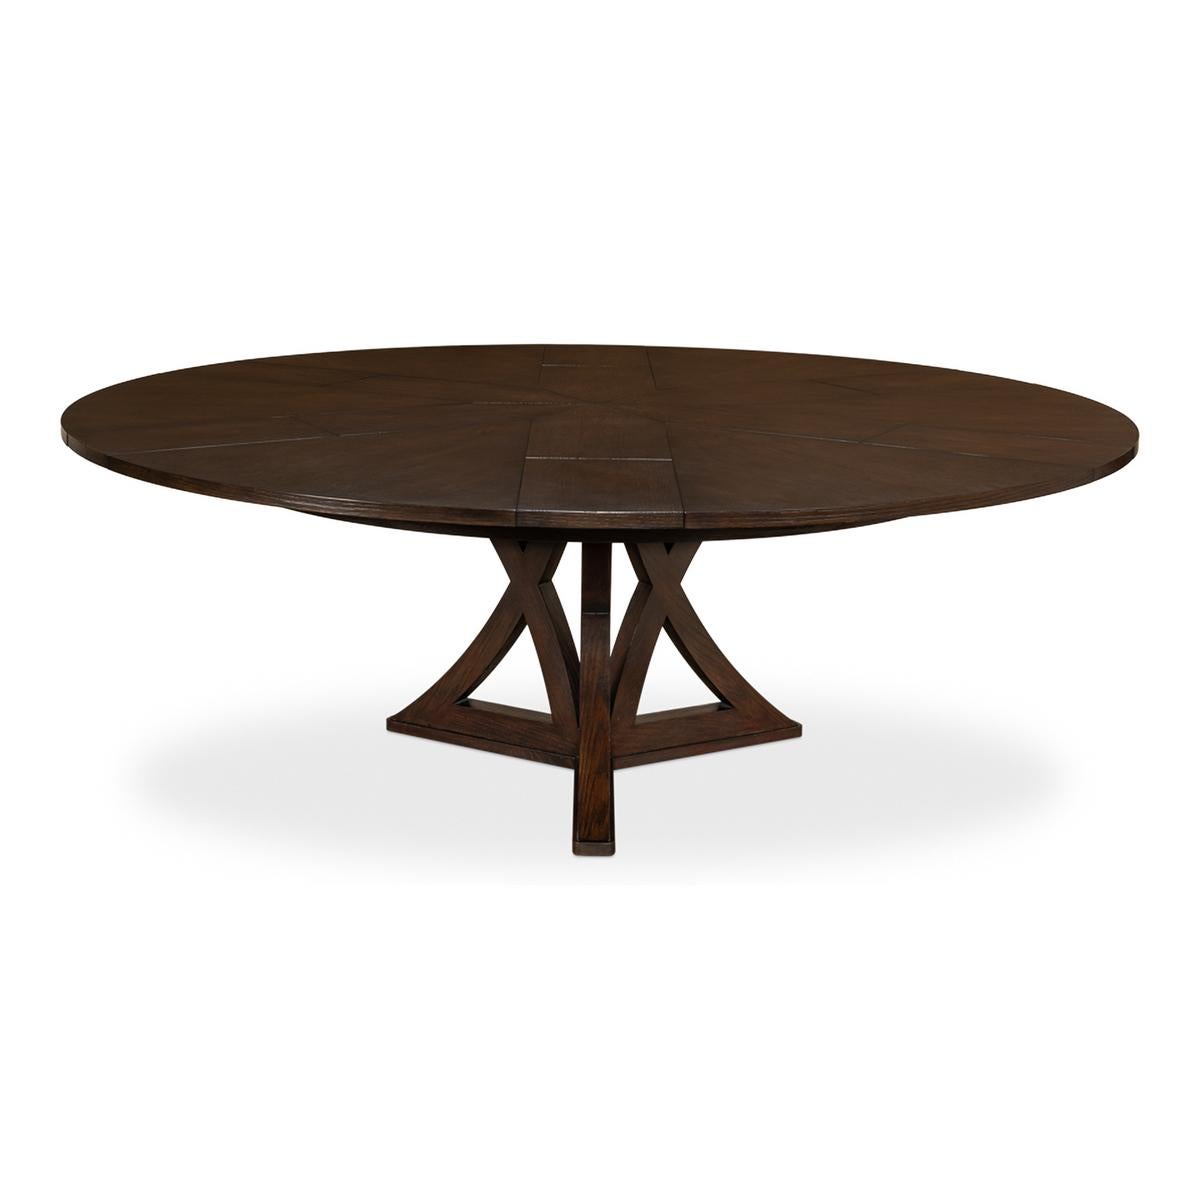 Vietnamese Rustic Round Dining Table, Burnt Brown Oak For Sale